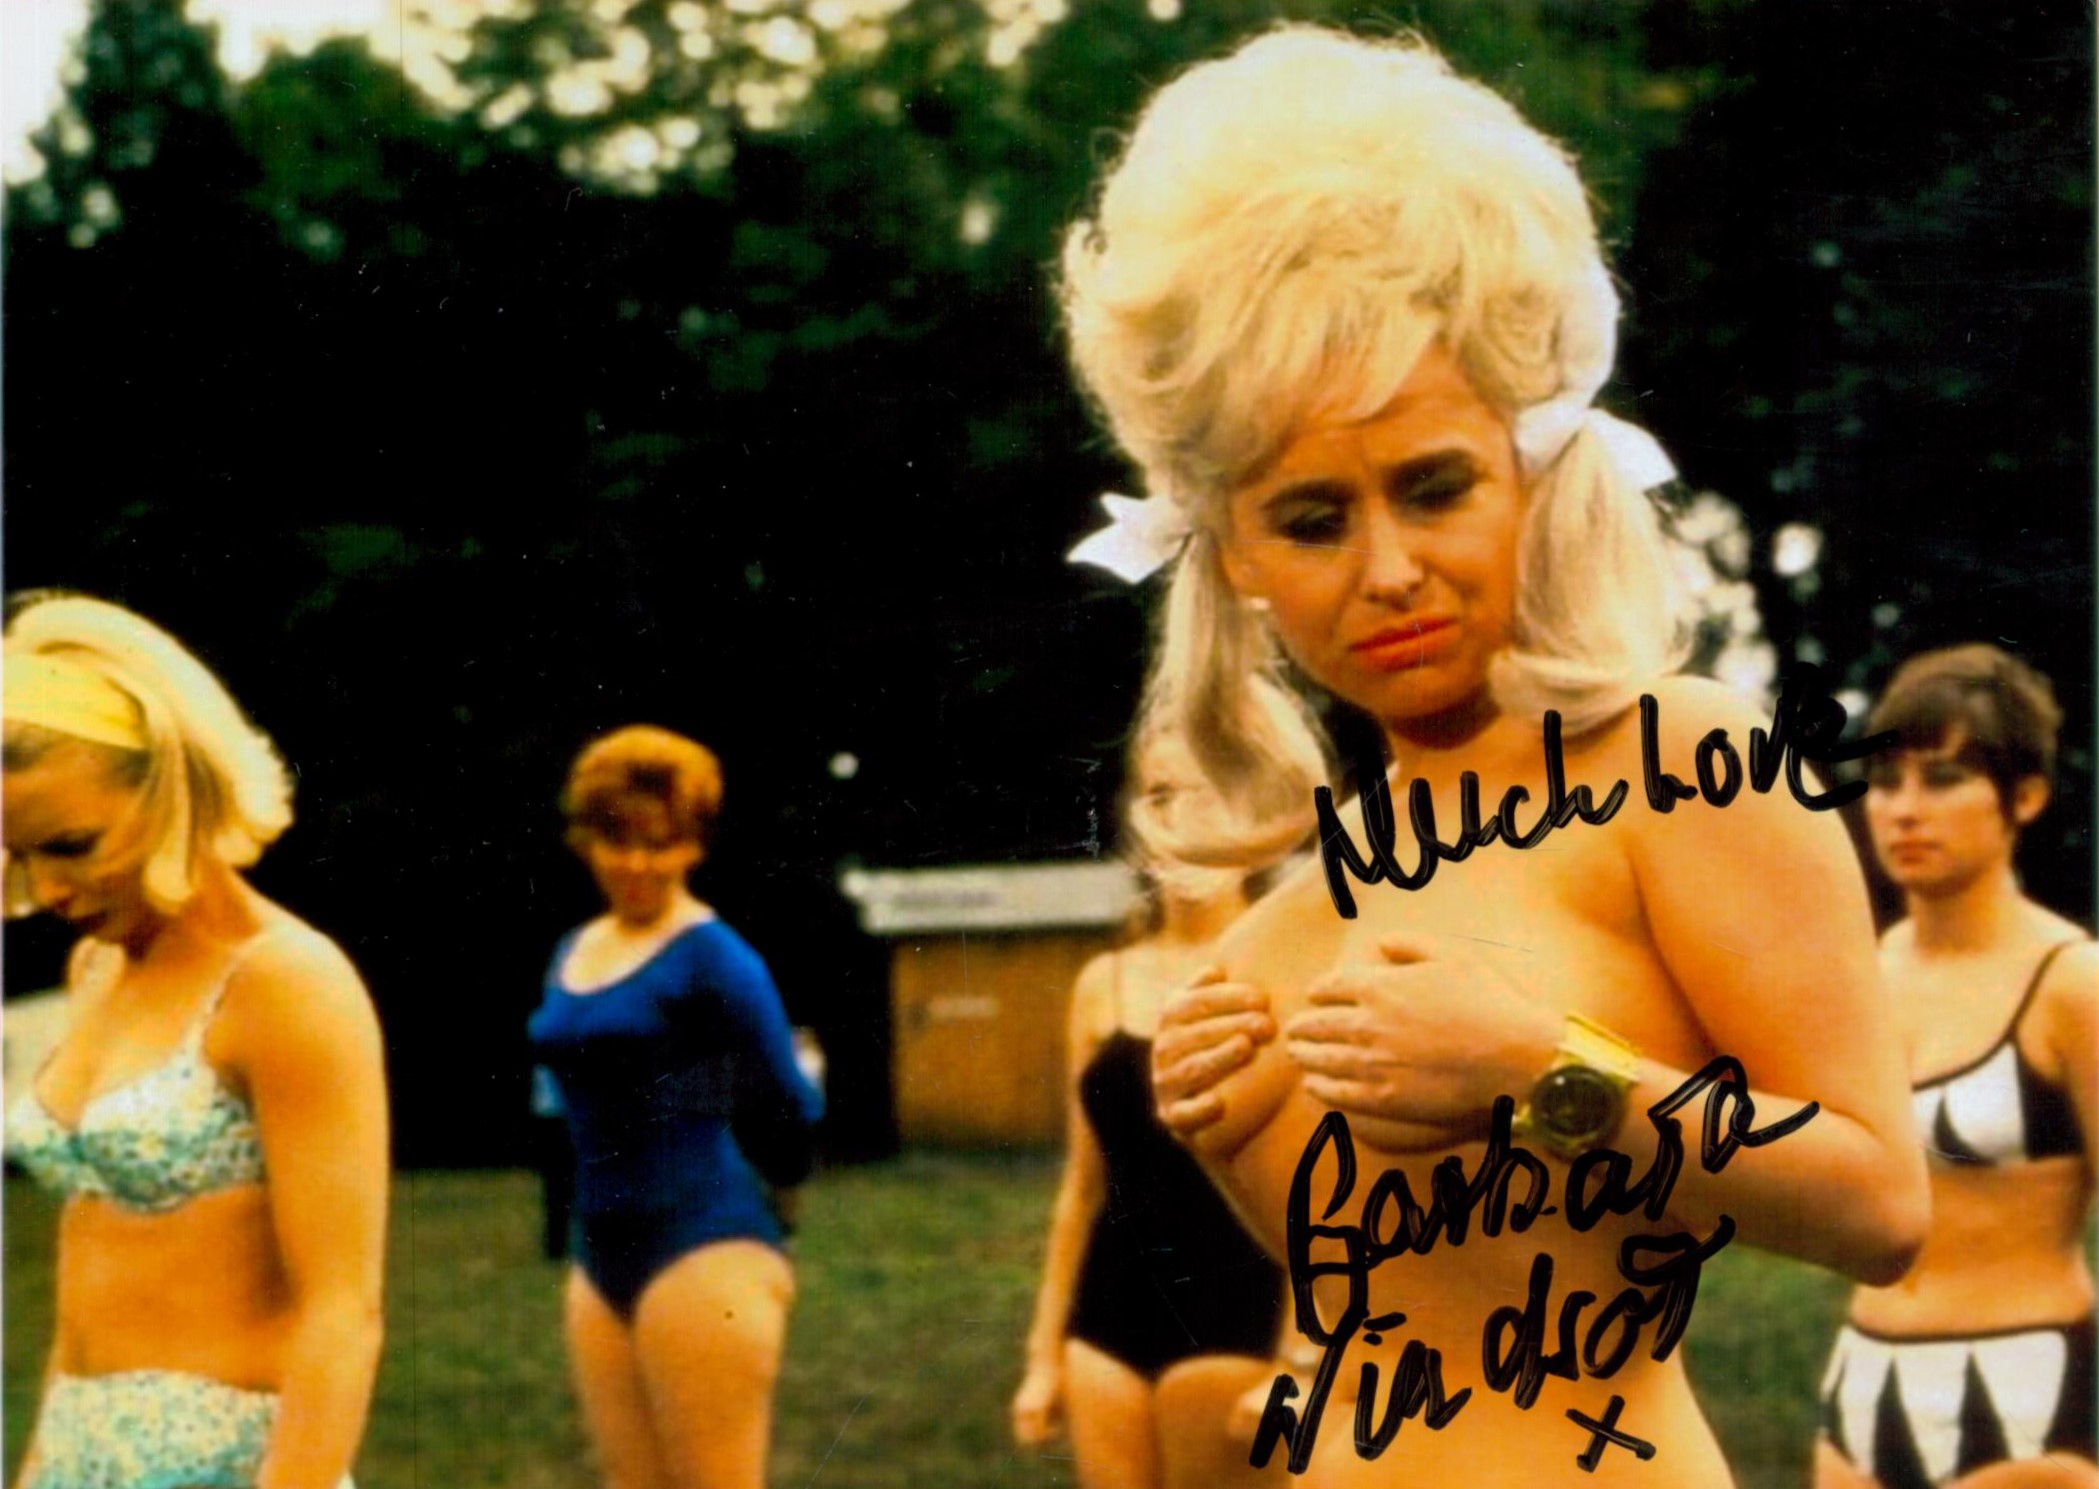 BARBARA WINDSOR (1937-2020) Actress signed Carry On Photo. Good condition. All autographs come